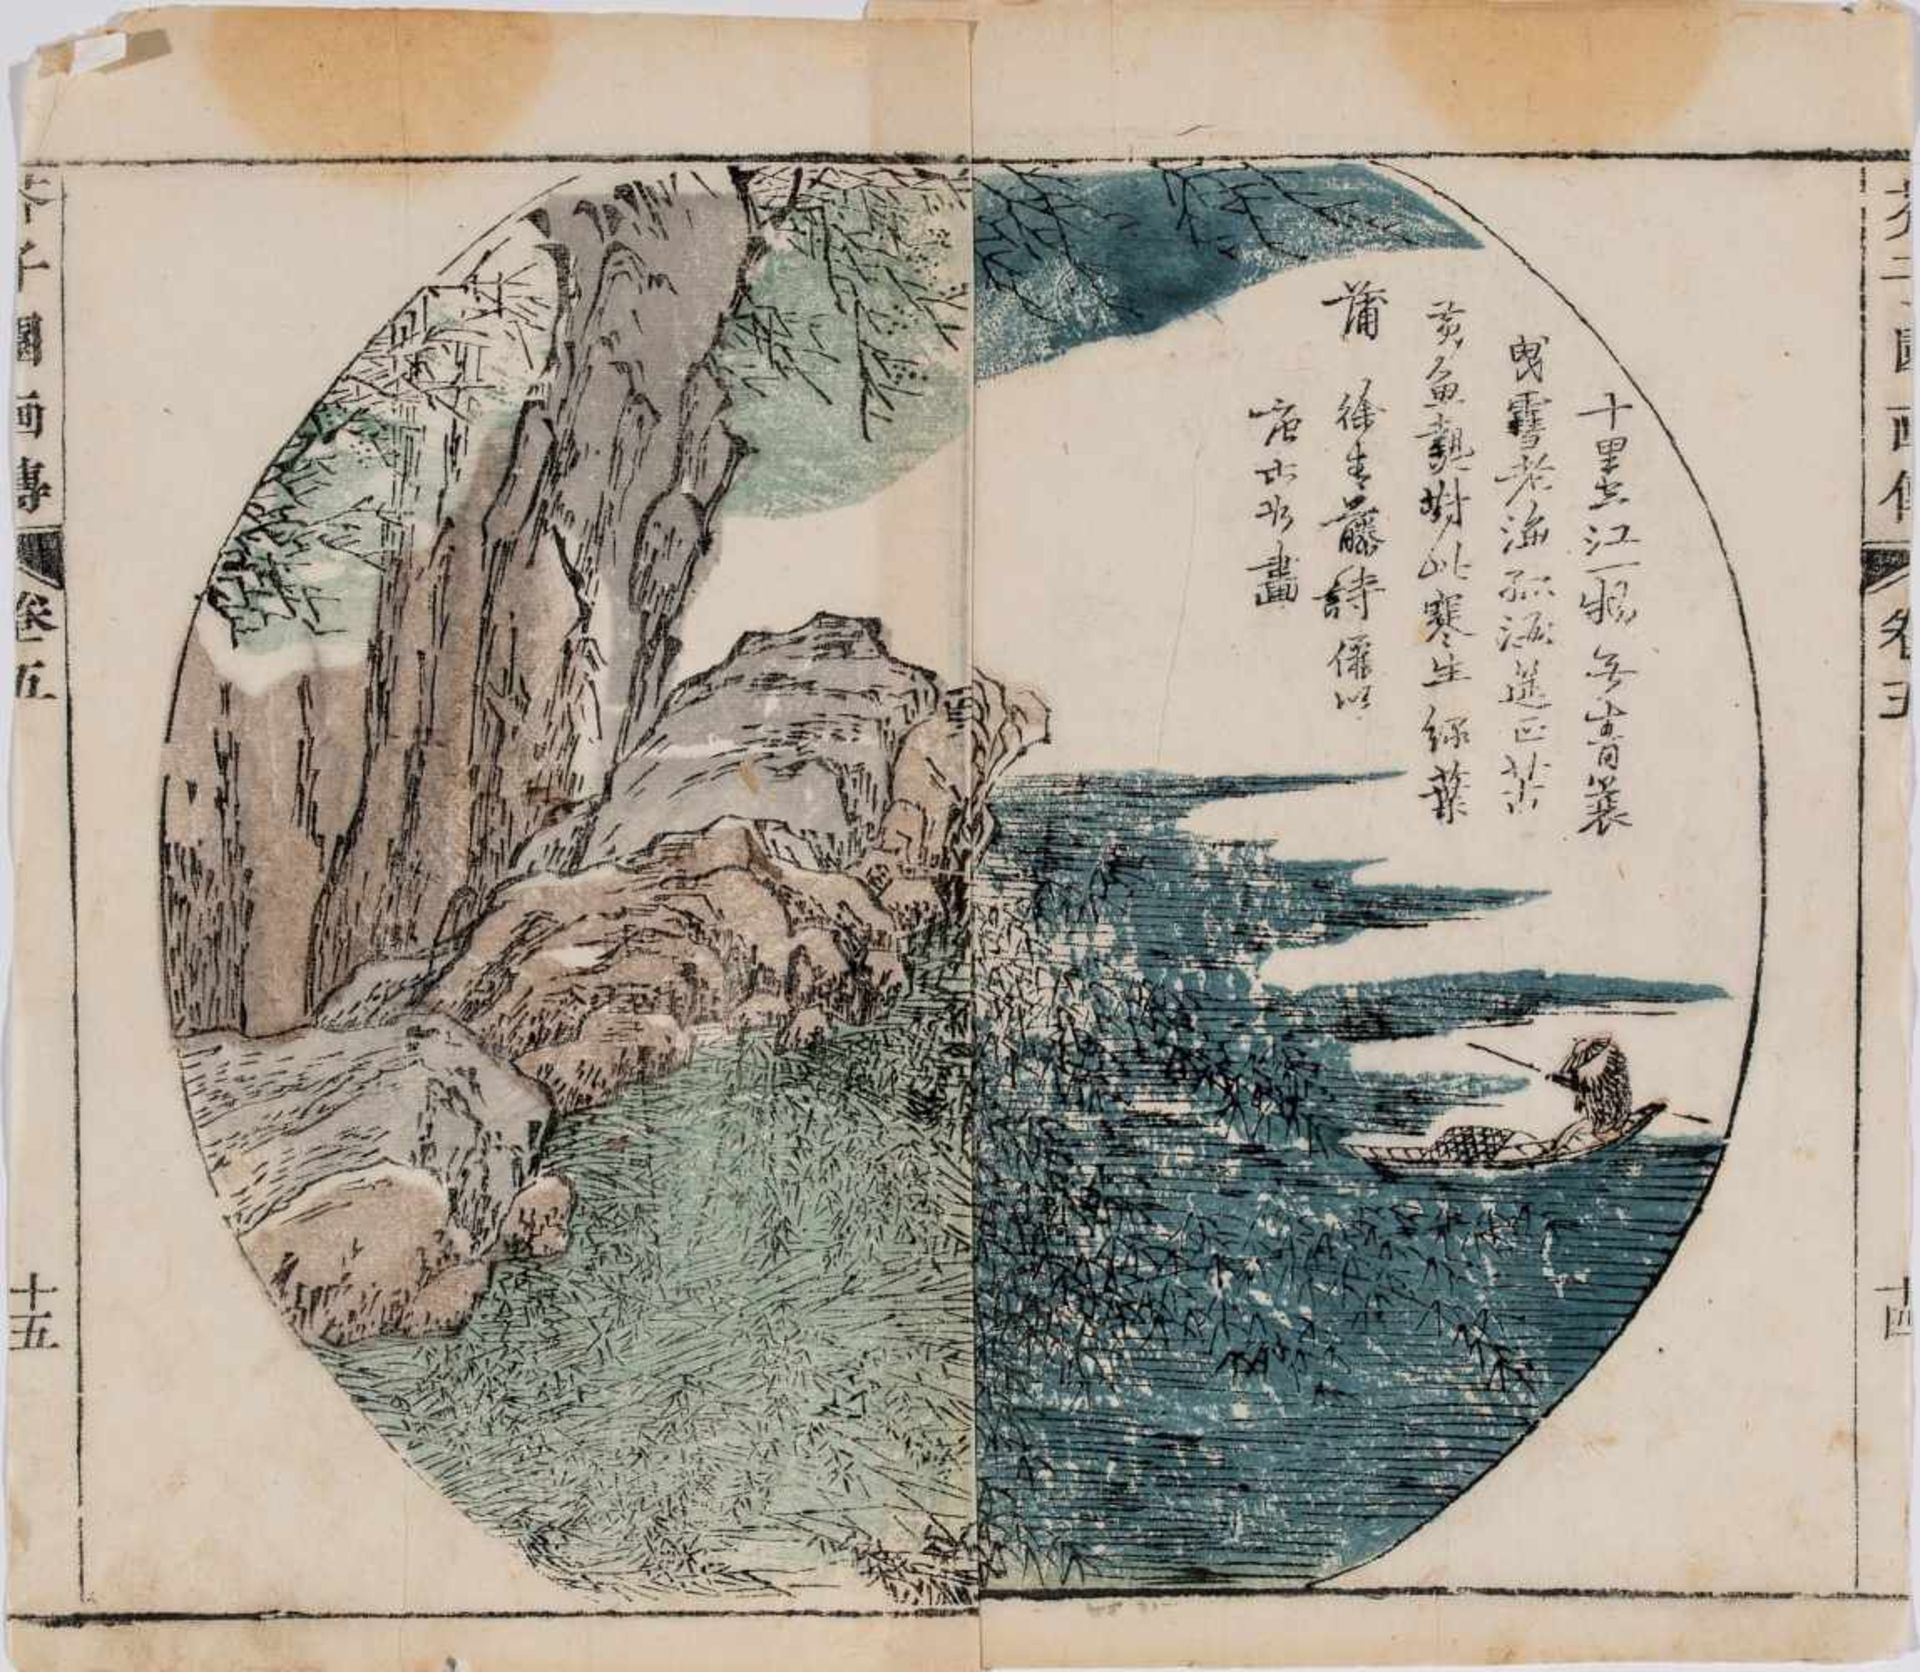 SIX CHINESE COLOR WOODBLOCK PRINTS, 18th CENTURYColor woodblock printsChina, 18th centuryThe six - Bild 7 aus 7